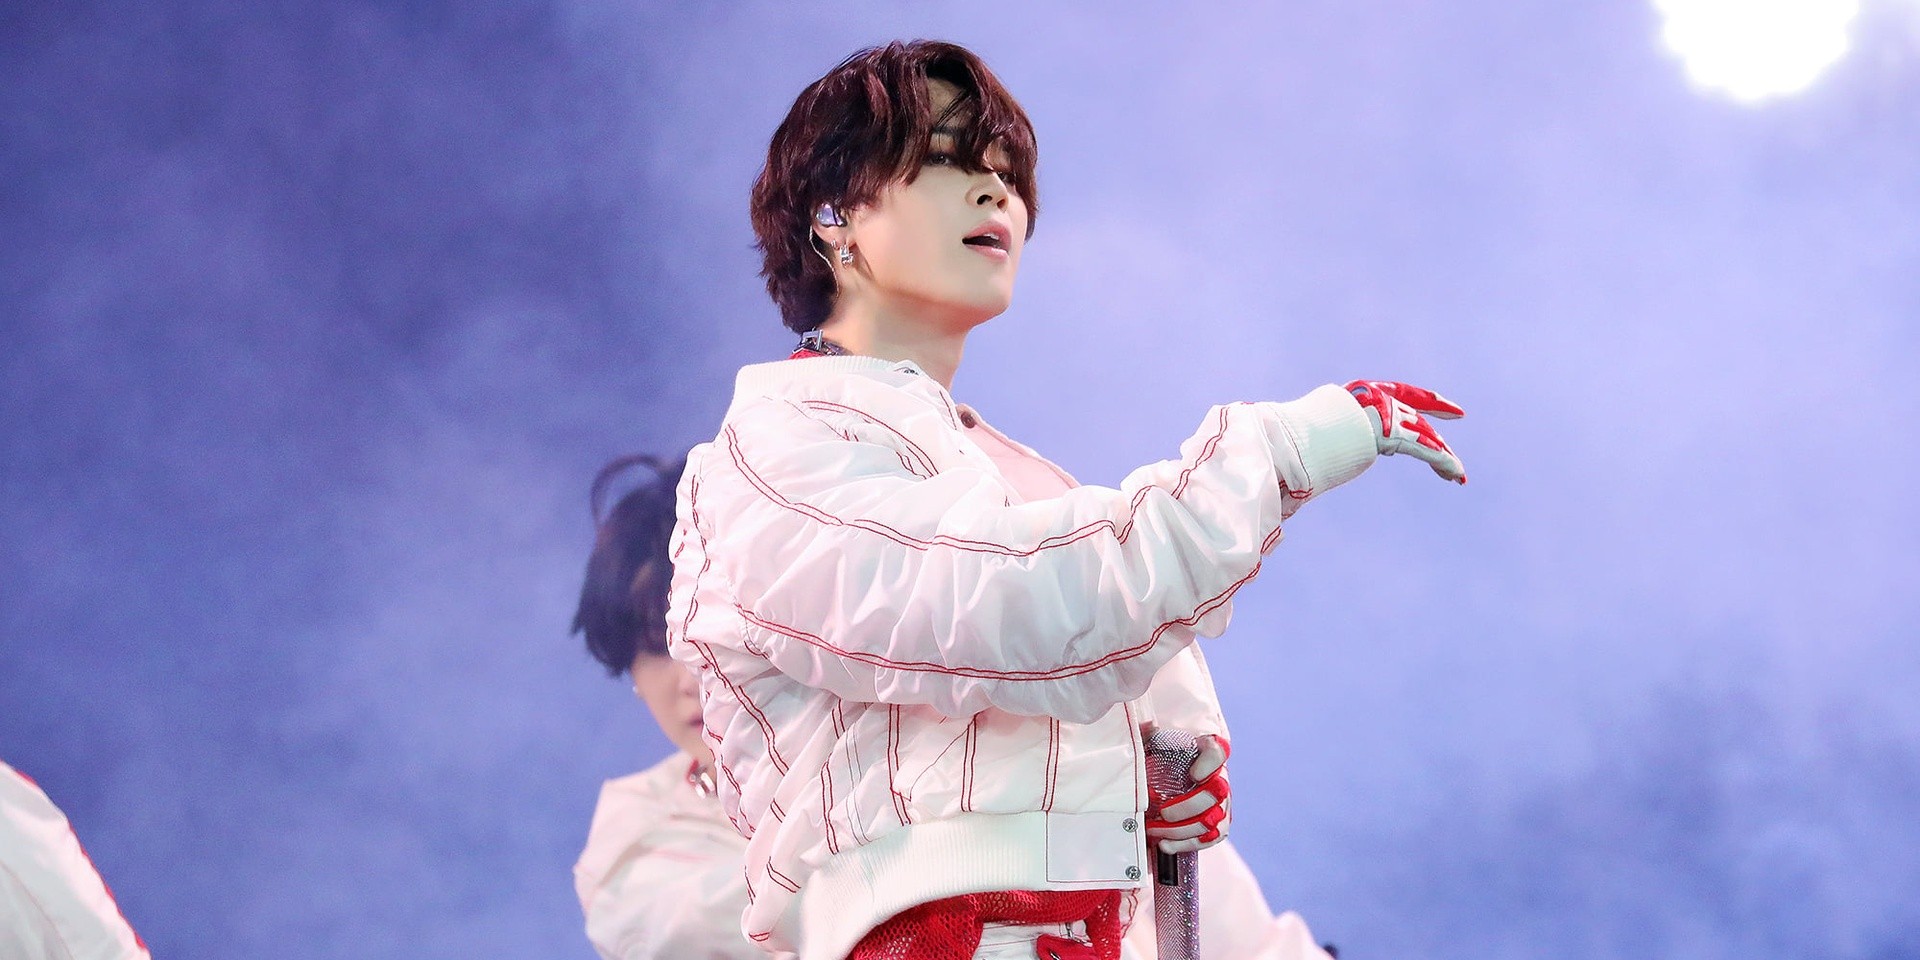 BTS ARMY celebrate Jimin's birthday with "Jimin Land", fountain shows, charity fundraisers, and more